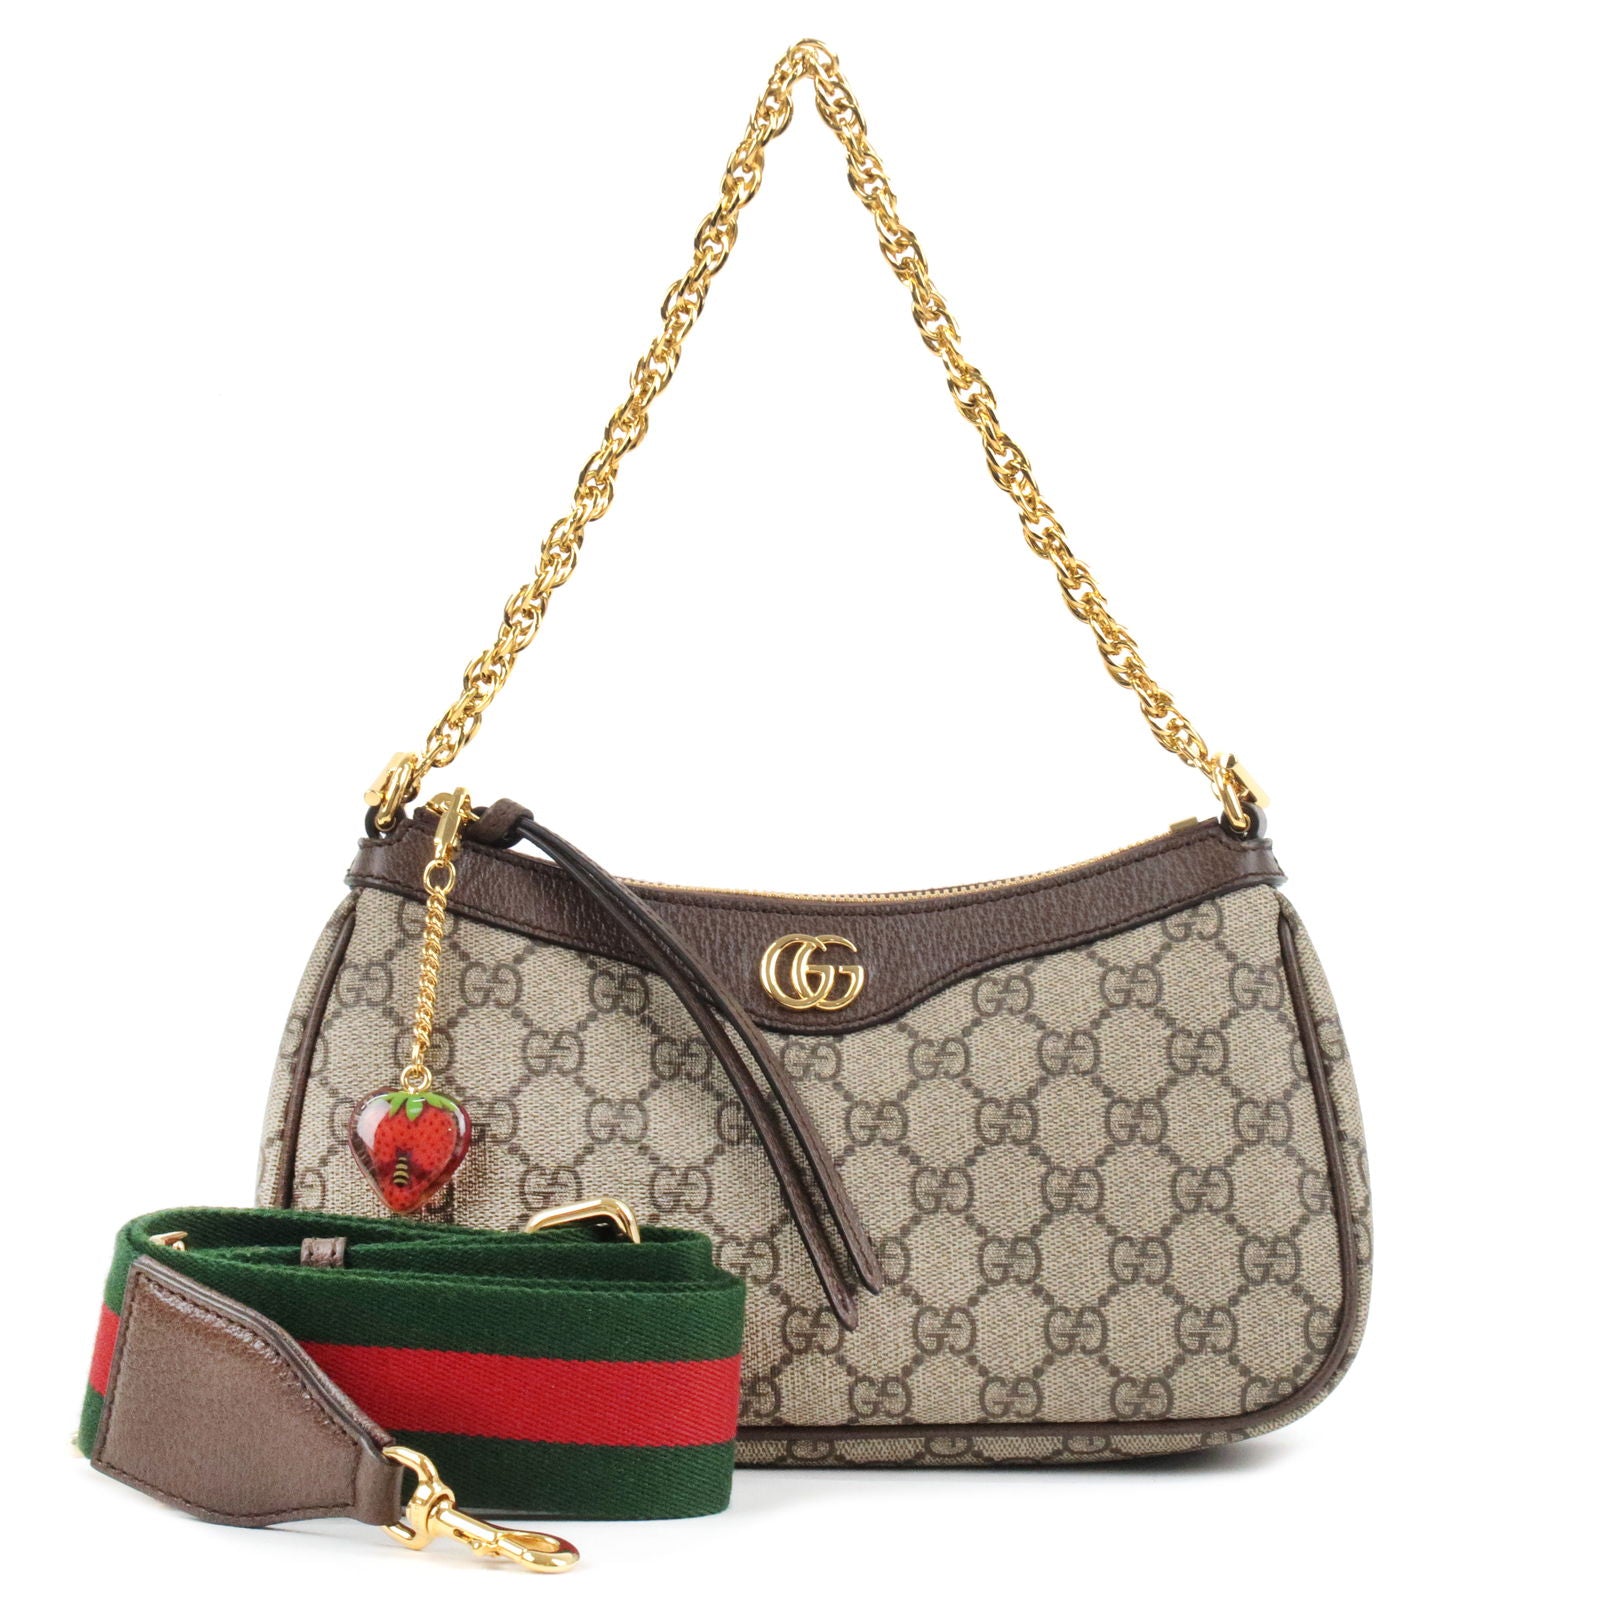 GUCCI-Ophidia-GG-Supreme-Small-Leather-2Way-Bag-Beige-Brown-735132